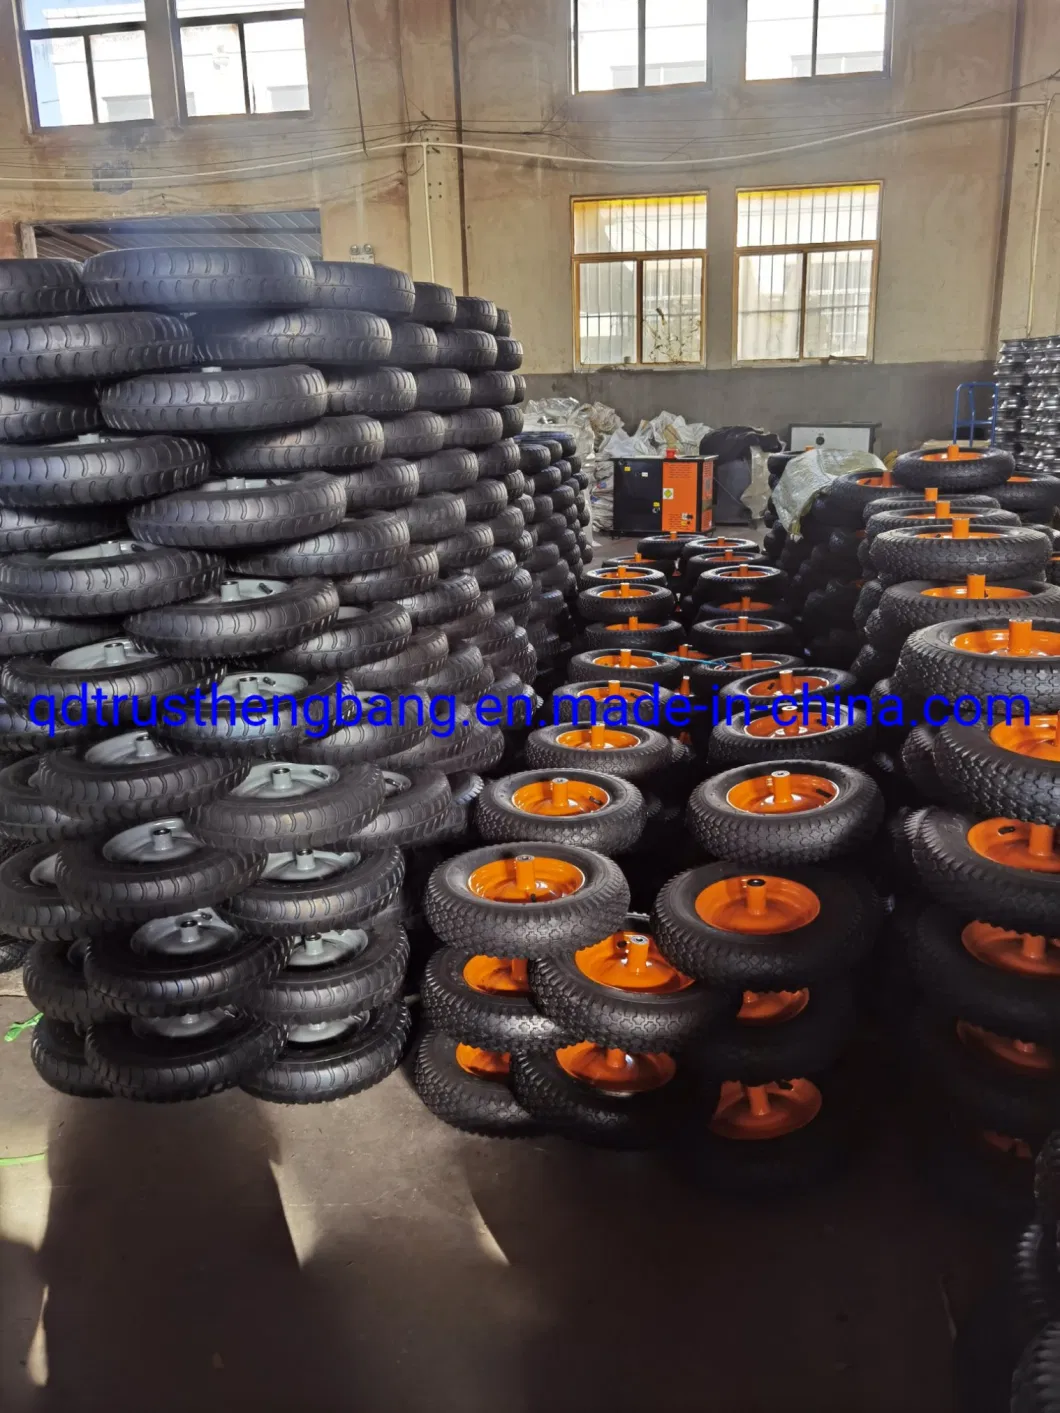 16 Inch 16X4.50-8 Pneumatic Inflatable Rubber Tire Wheel for Hand Truck Trolley Lawn Mower Spreader Trolley Stroller